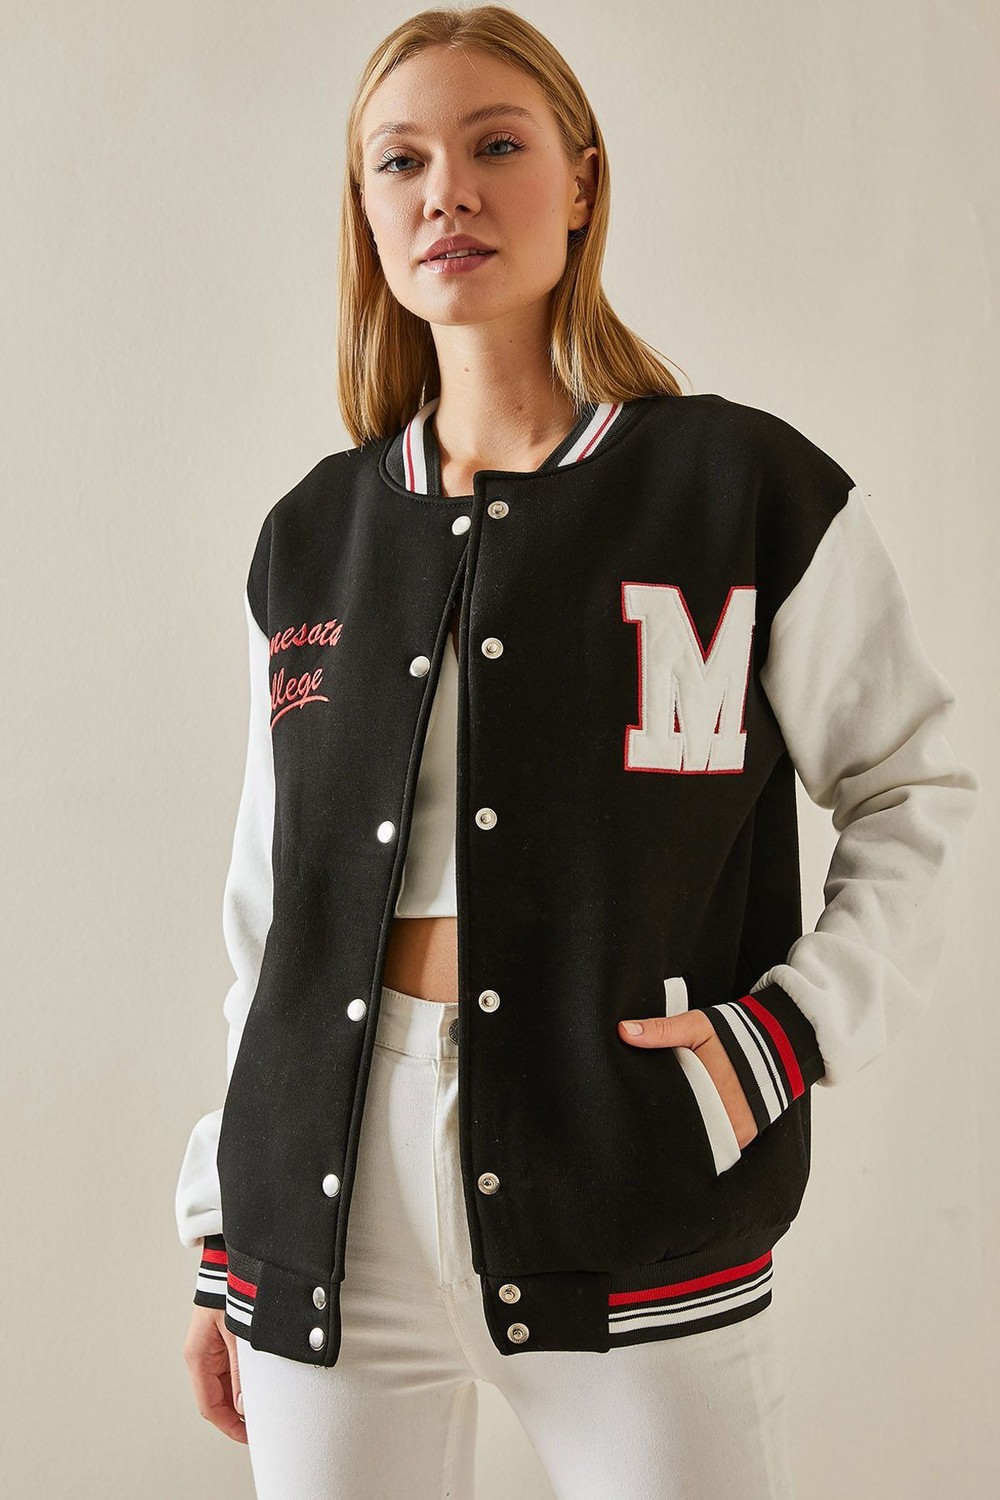 XHAN Black Snap Buttons College Jacket